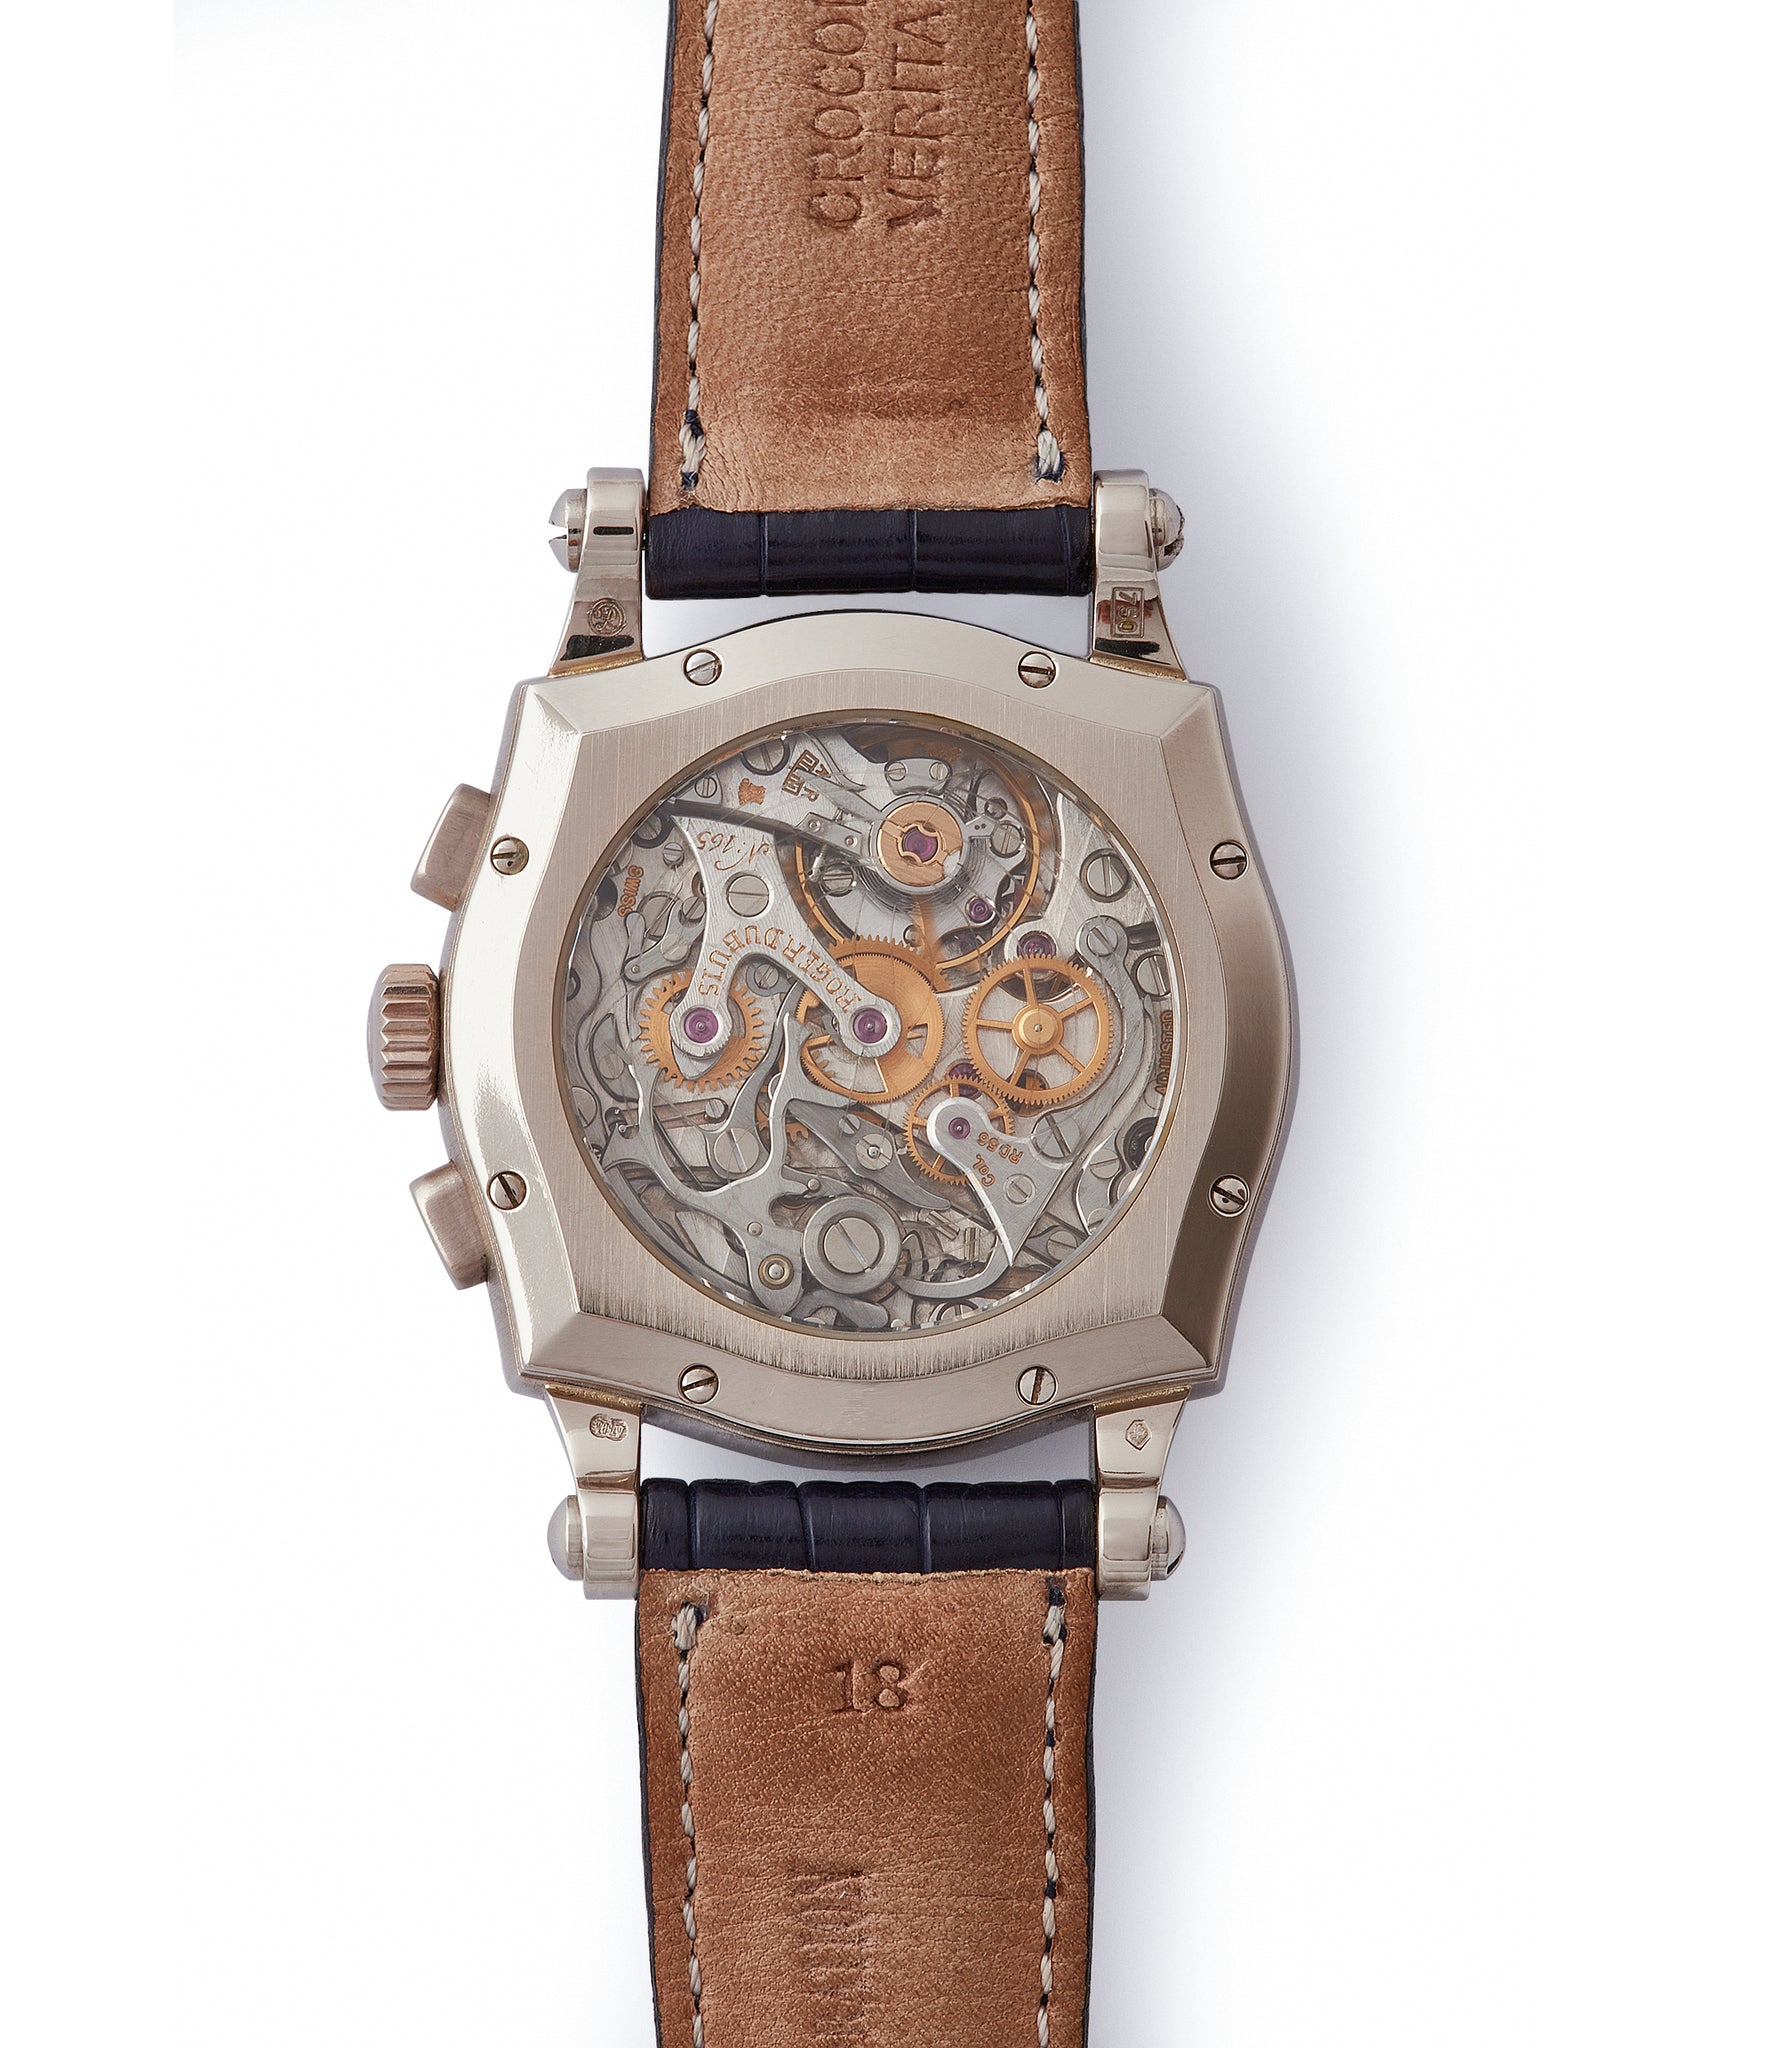 Sympathie Chronograph RD 56 mechanical manual-winding movement hand-finished by Roger Dubuis independent watchmaker